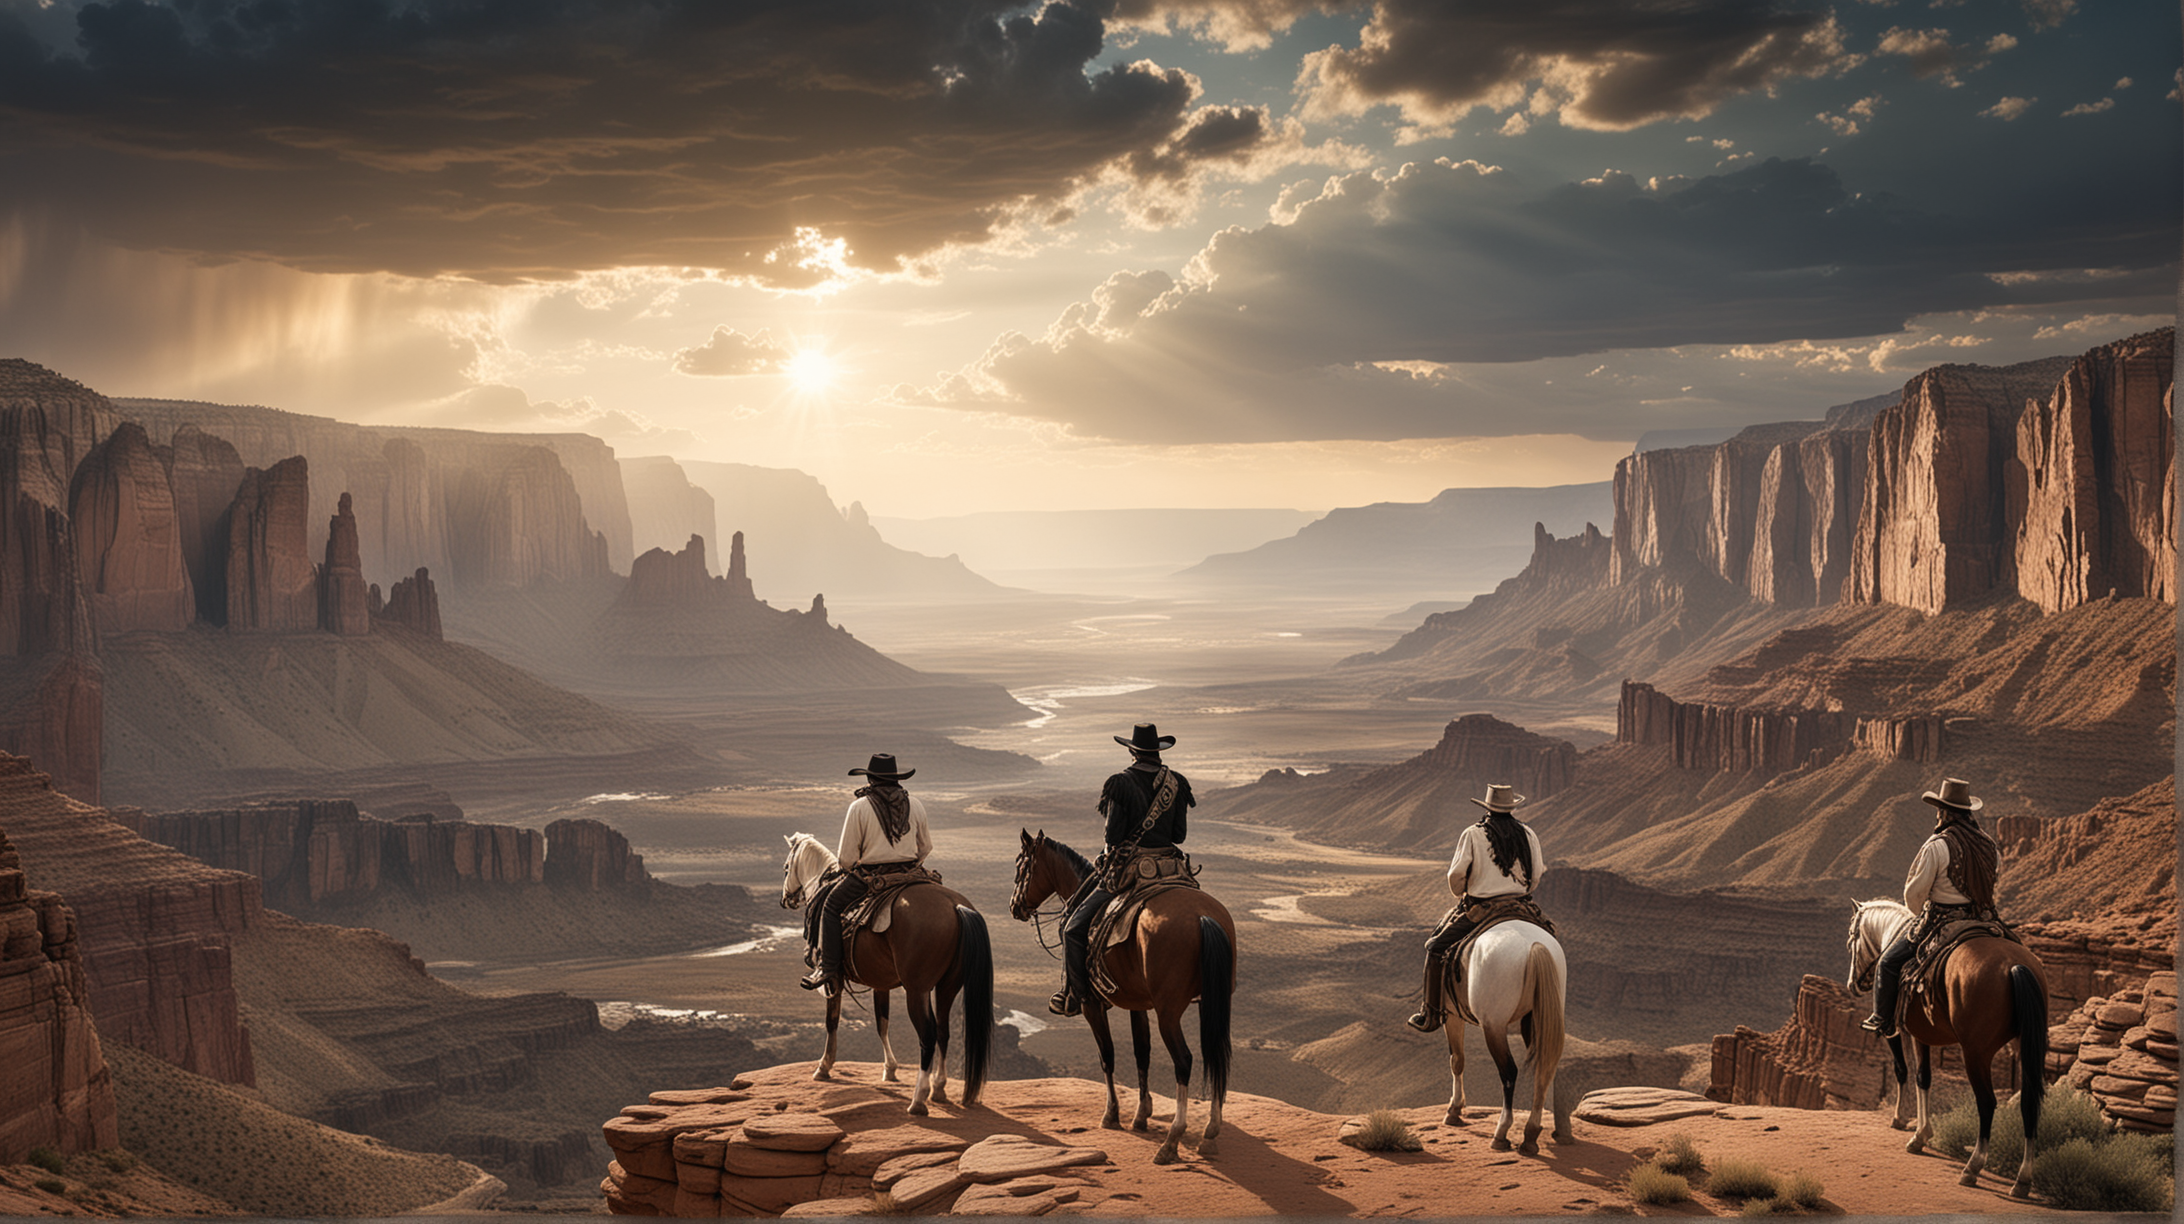 The Lone Ranger and Tonto are sitting on their horses at the edge of a cliff, looking over a vast western landscape of canyons and distant mountains, dramatic sky.